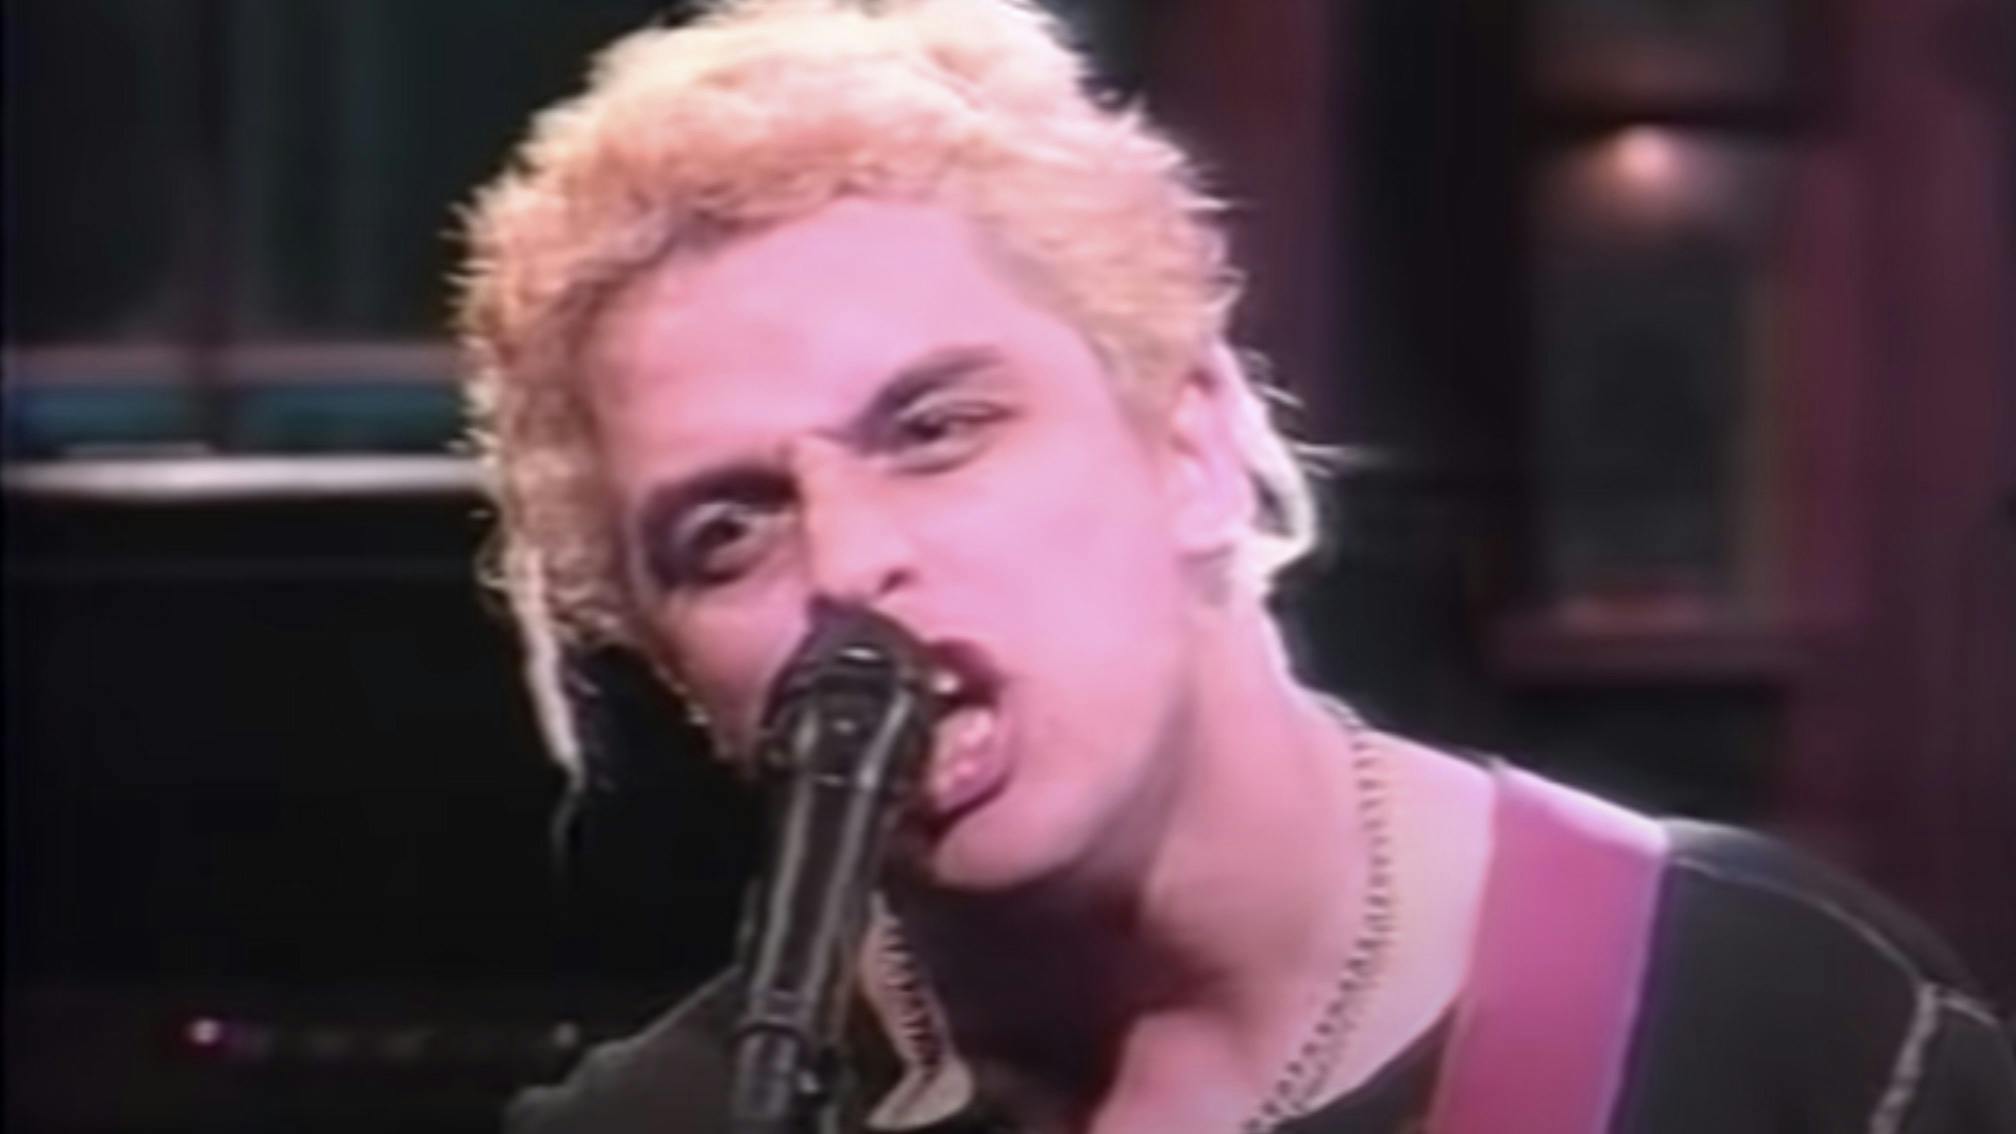 Watch Green Day Play Geek Stink Breath On SNL In 1994